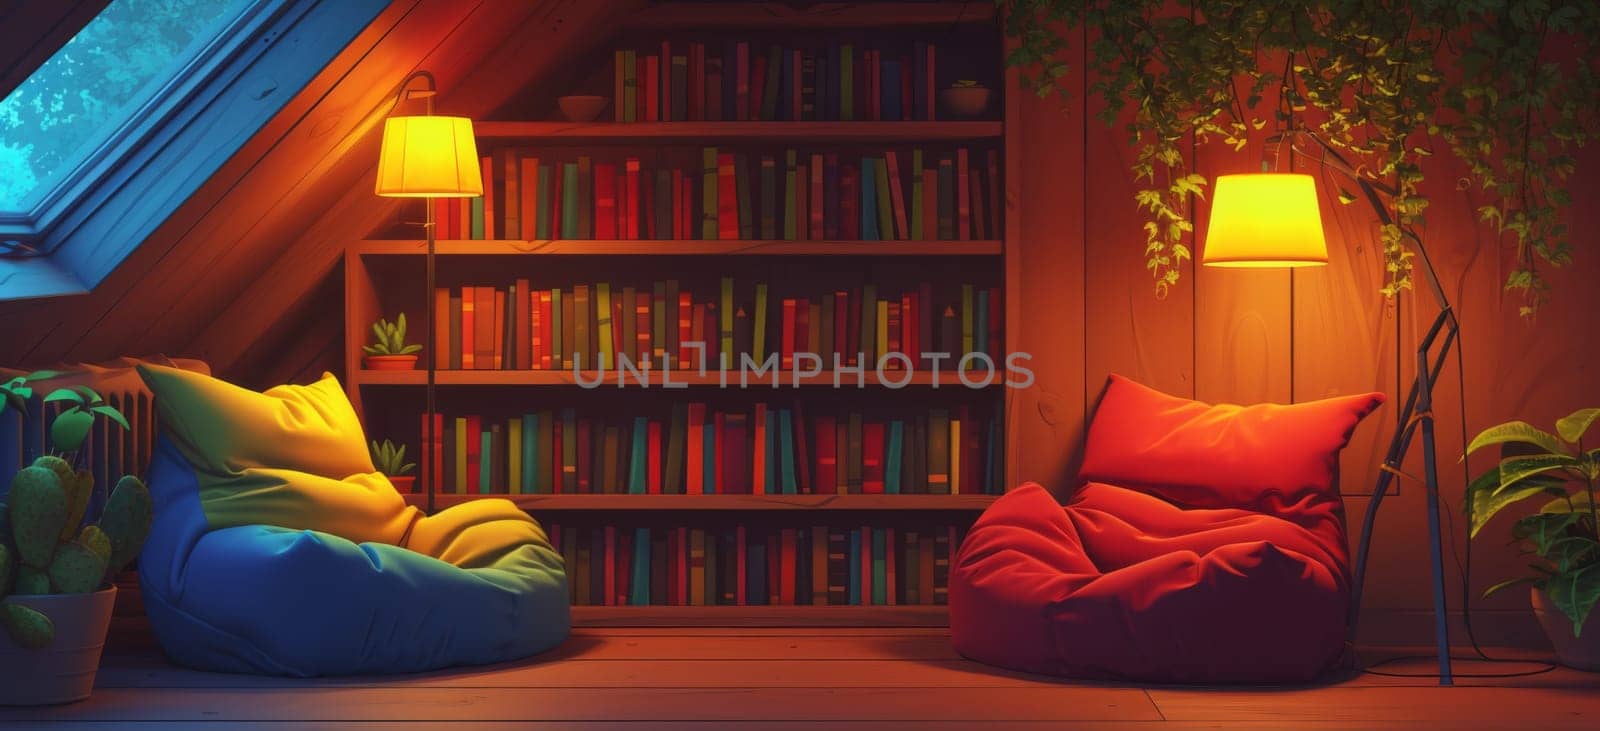 A room with two bean bags and a lamp in front of bookshelves